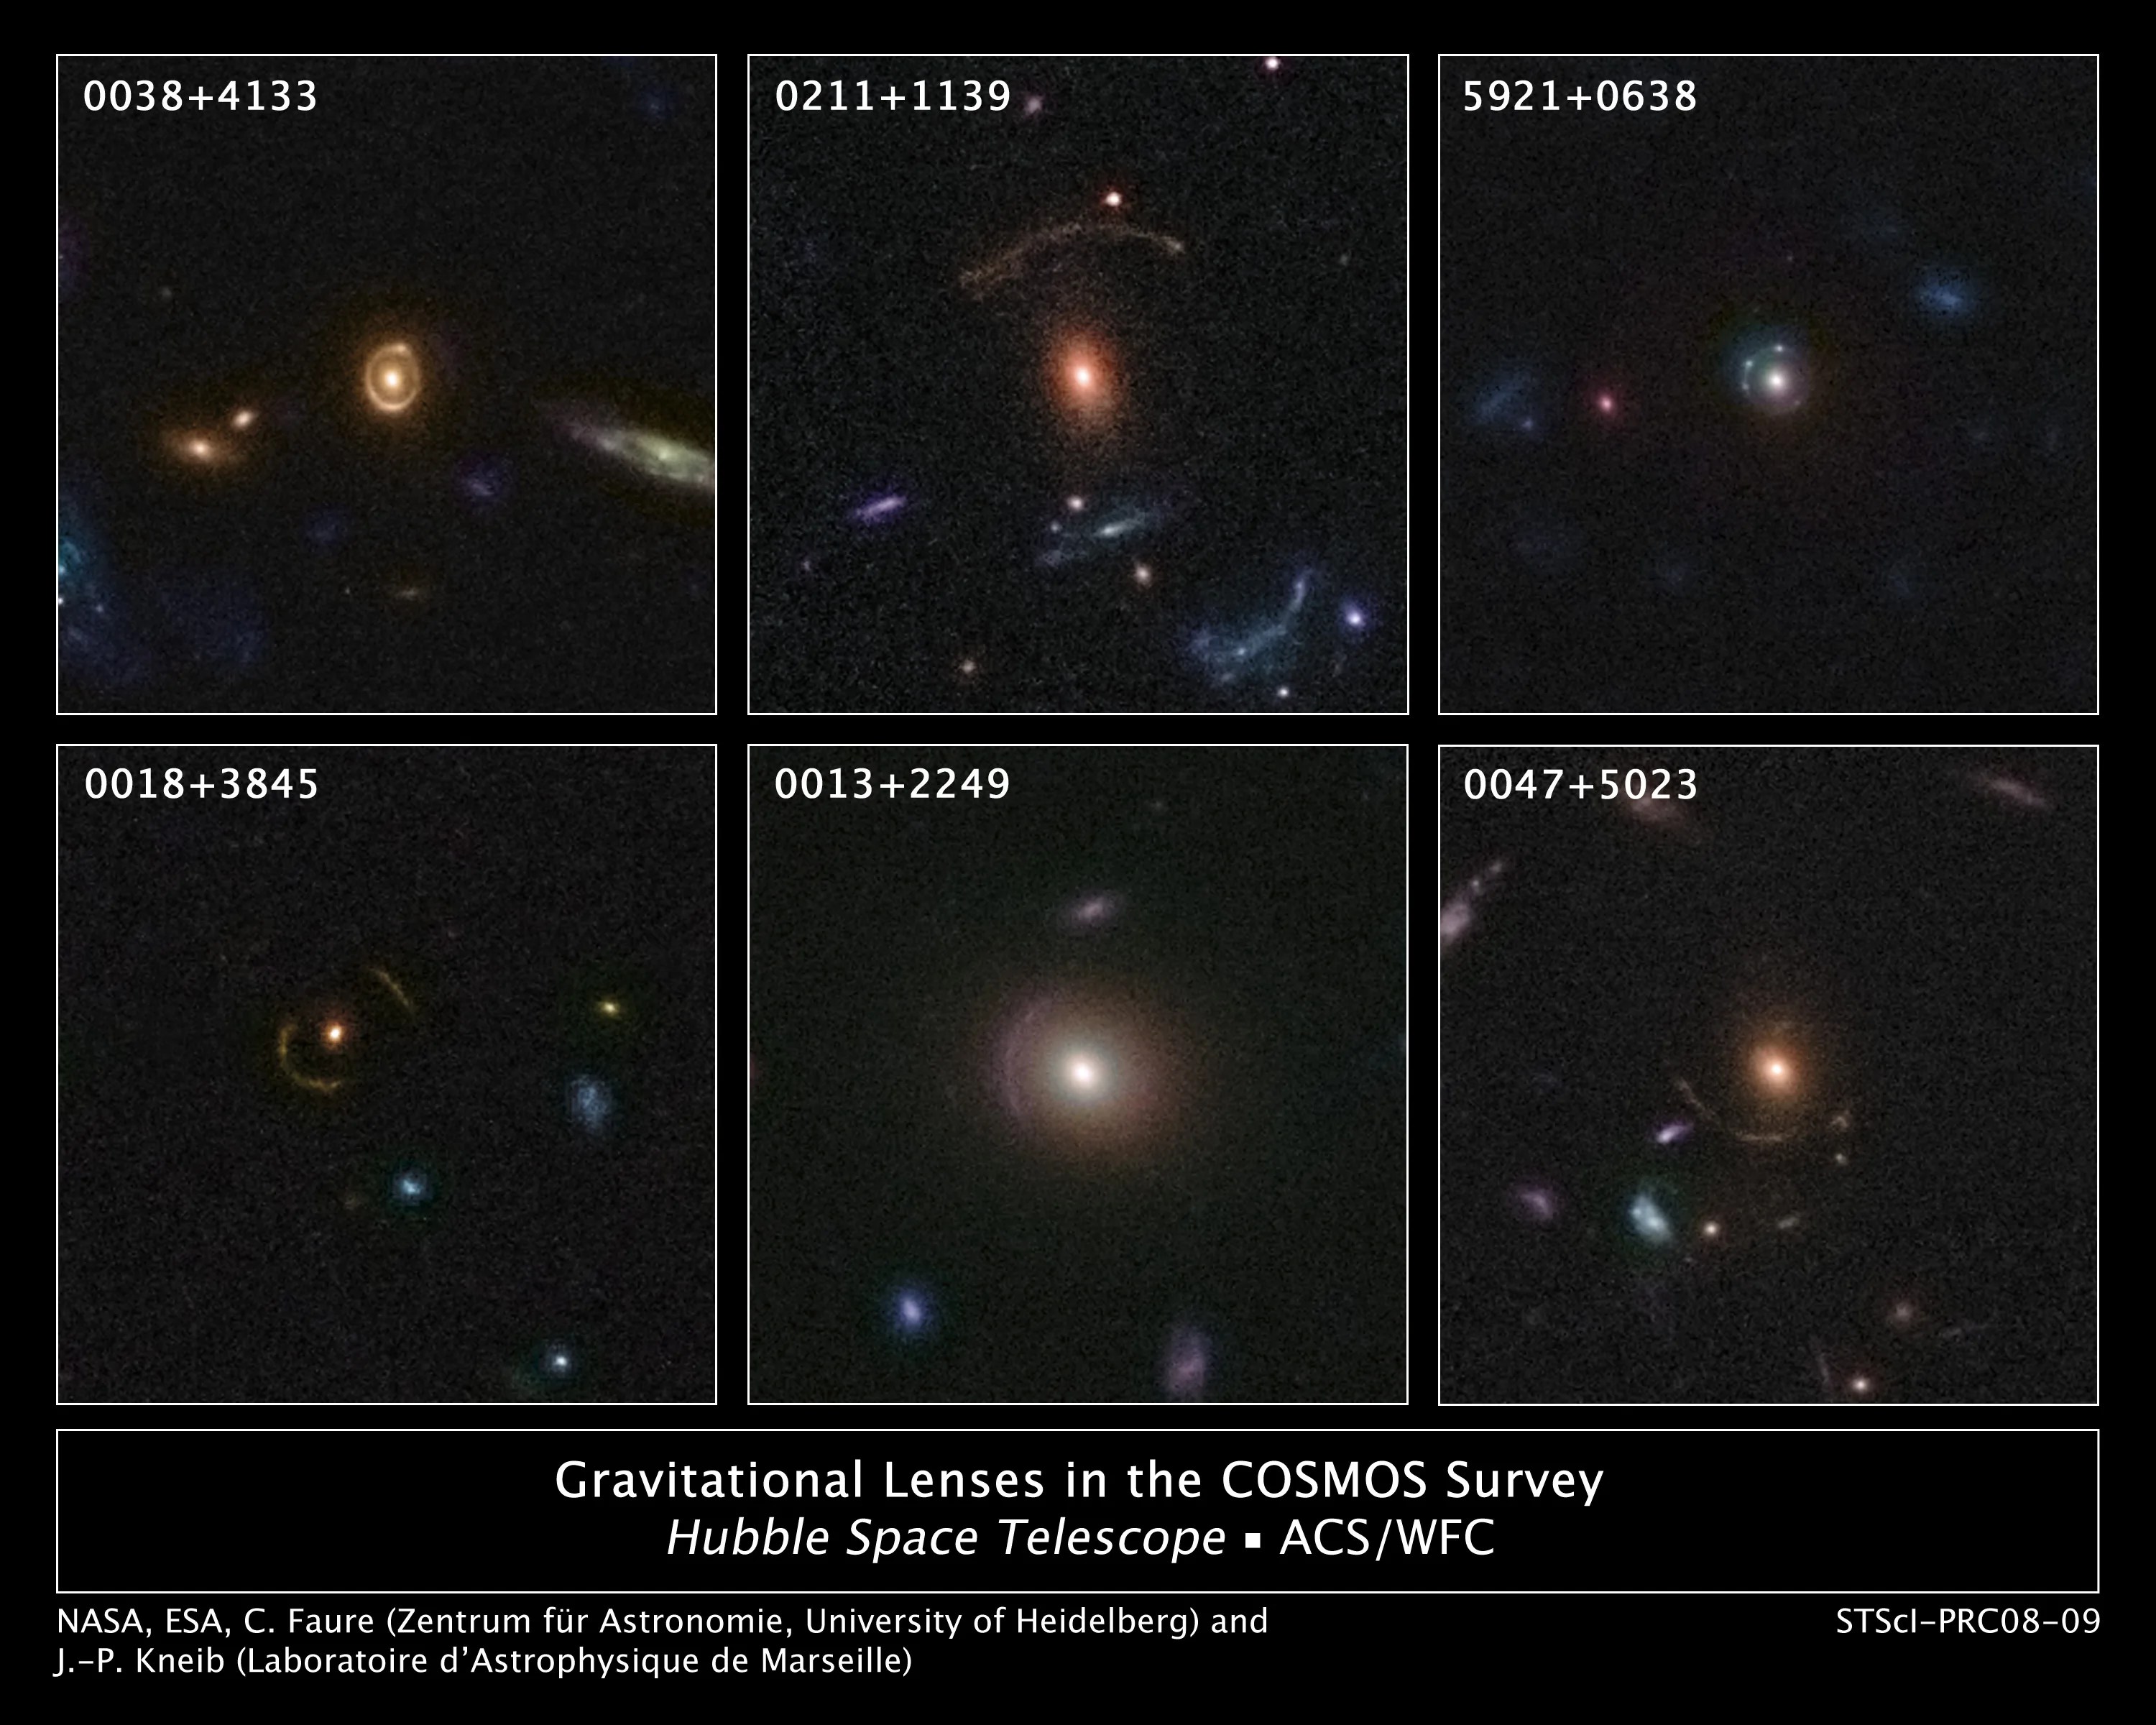 Astronomers using NASA's Hubble Space Telescope have compiled a large catalog of gravitational lenses in the distant universe.